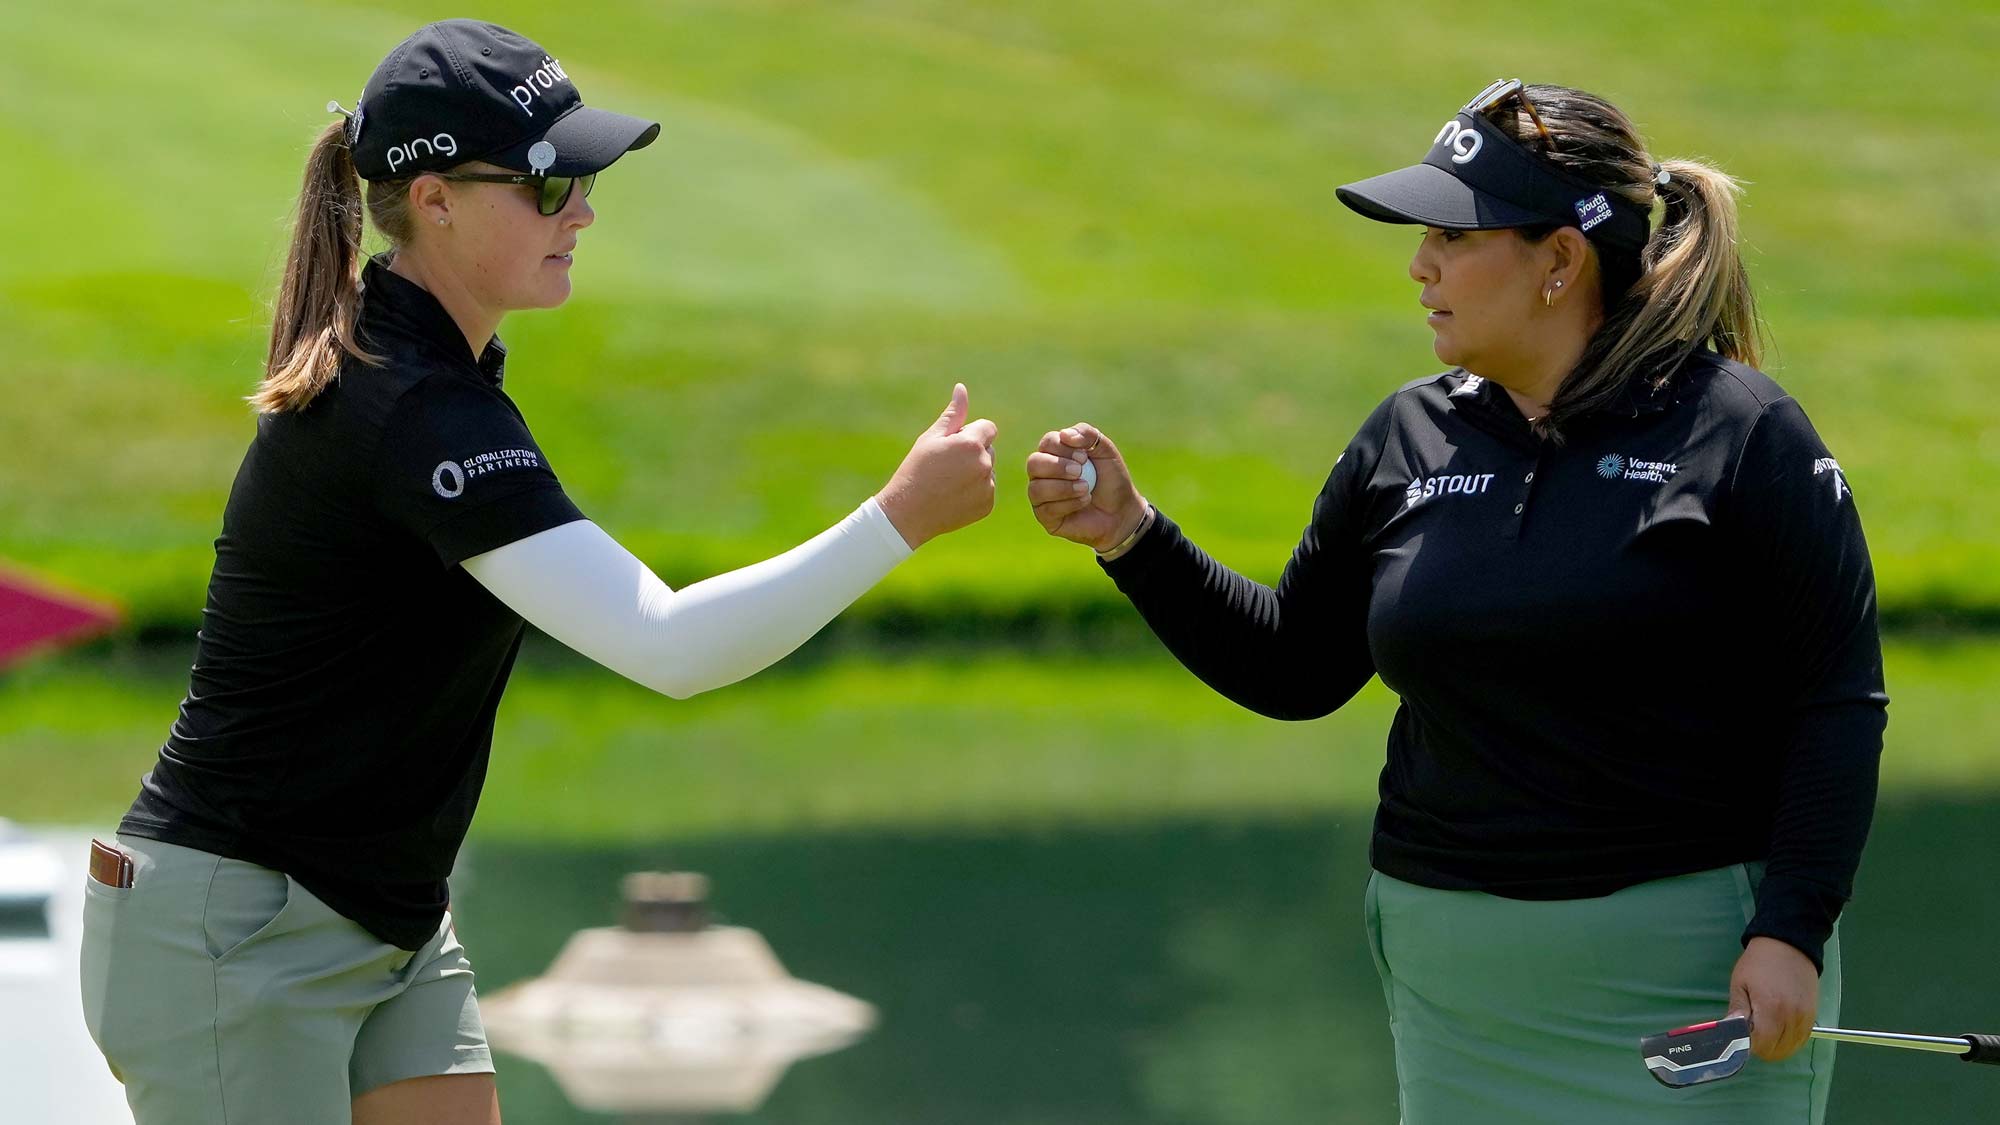 ennifer Kupcho of the United States (L) and Lizette Salas of the United States celebrate after making birdie on the fifth green during the final round of the Dow Great Lakes Bay Invitational